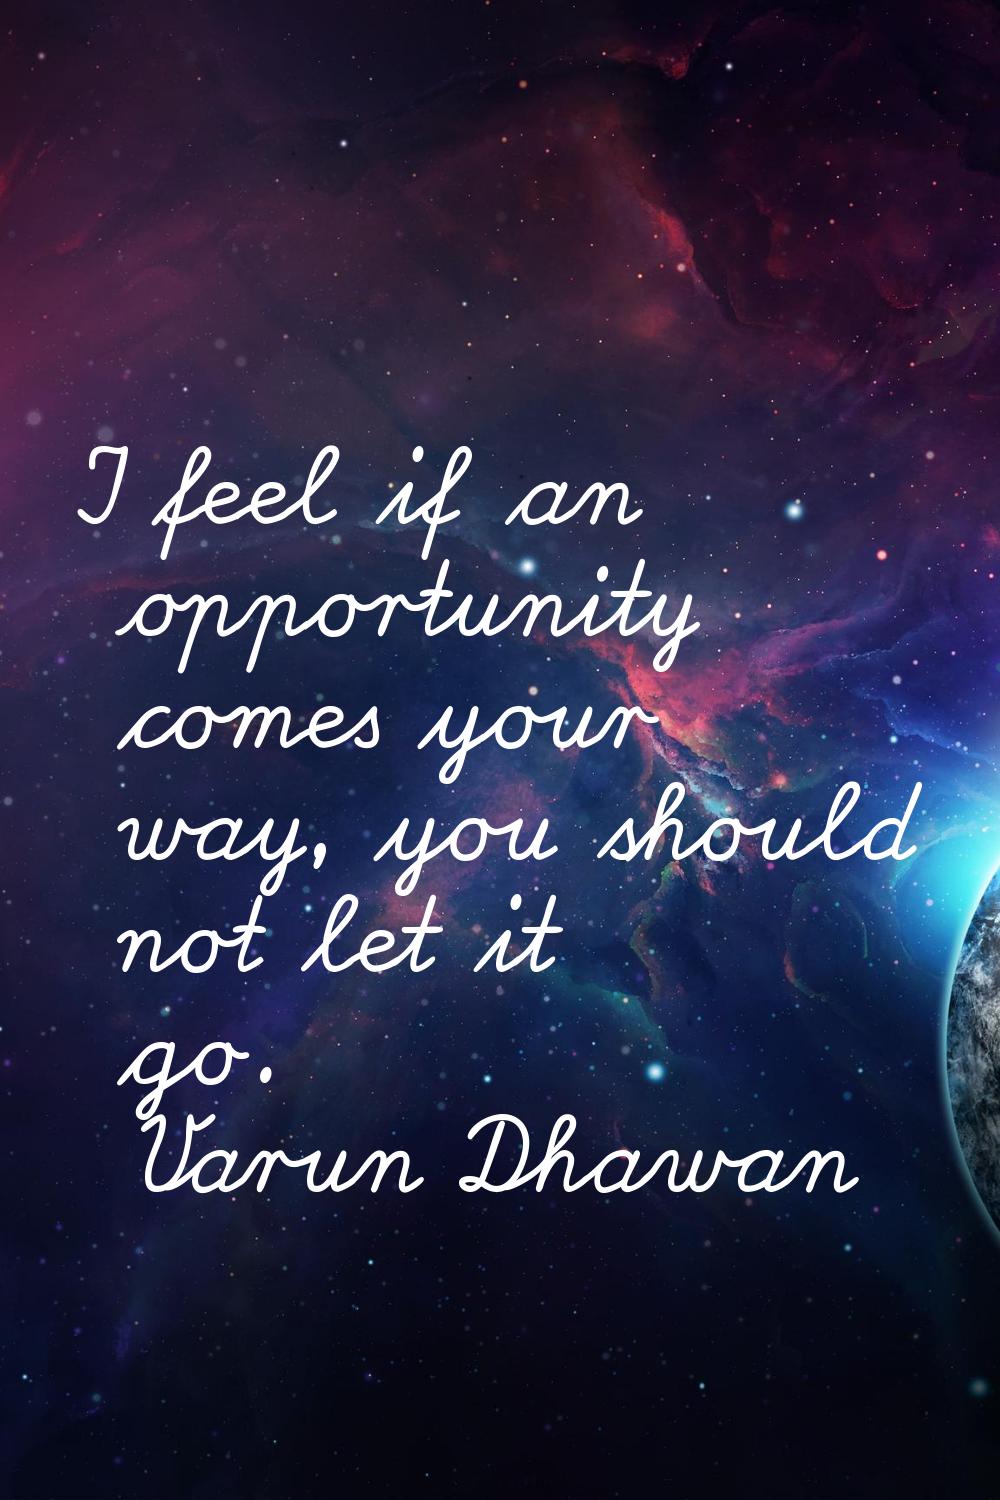 I feel if an opportunity comes your way, you should not let it go.